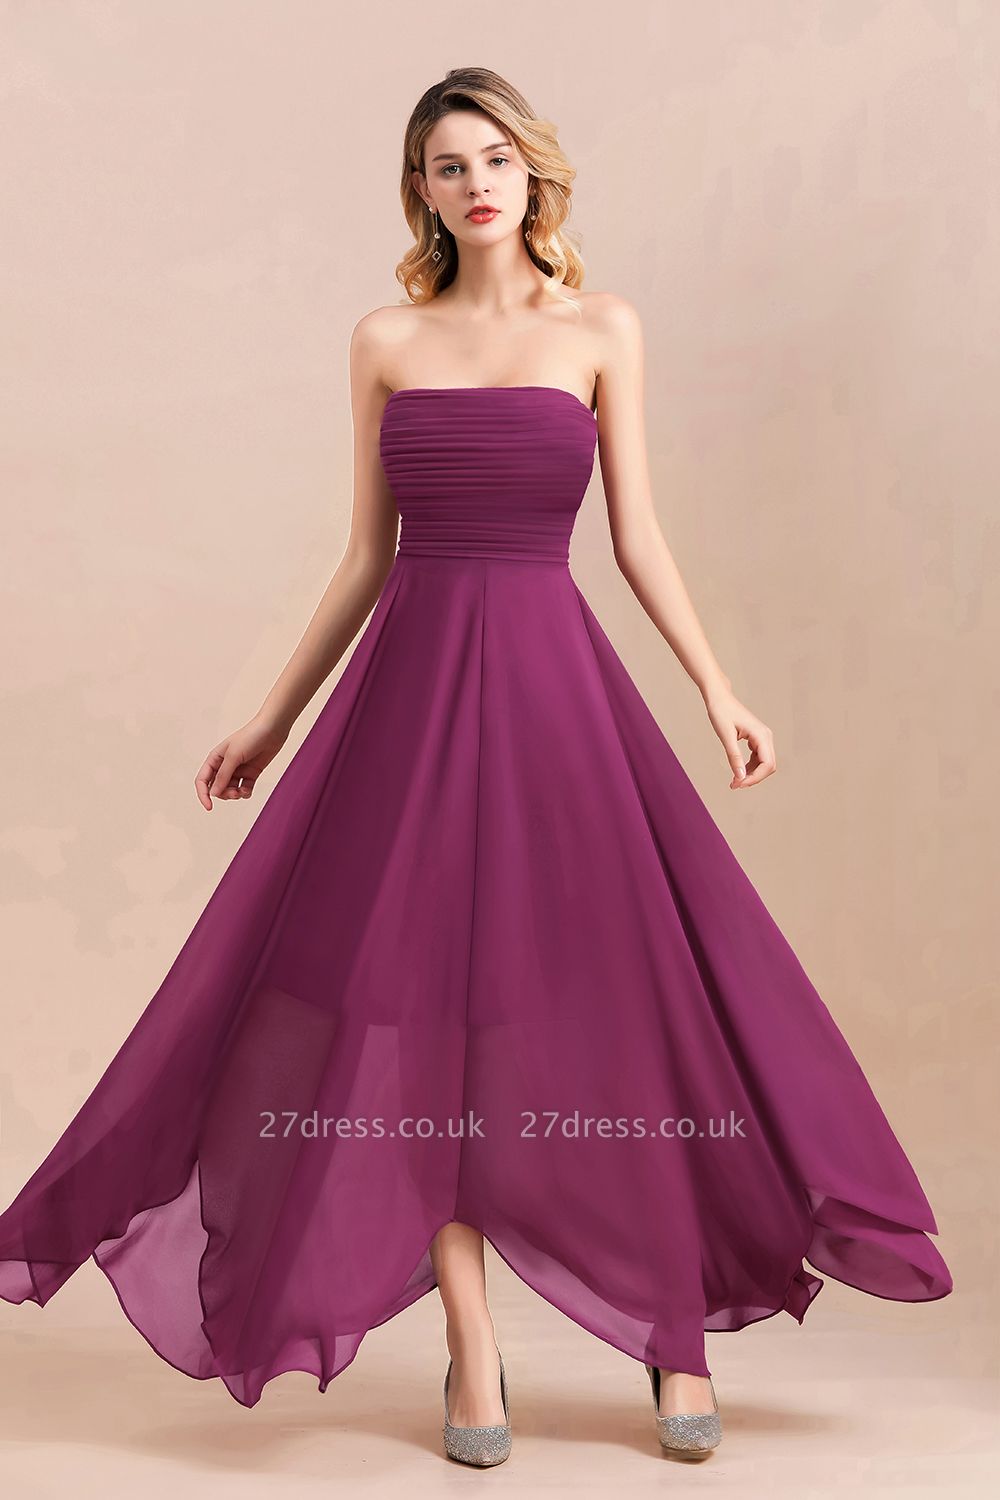 Strapless Orchid Ruched Chiffon Bridesmaid Dress Backless Ankle Length Wedding Party Dress